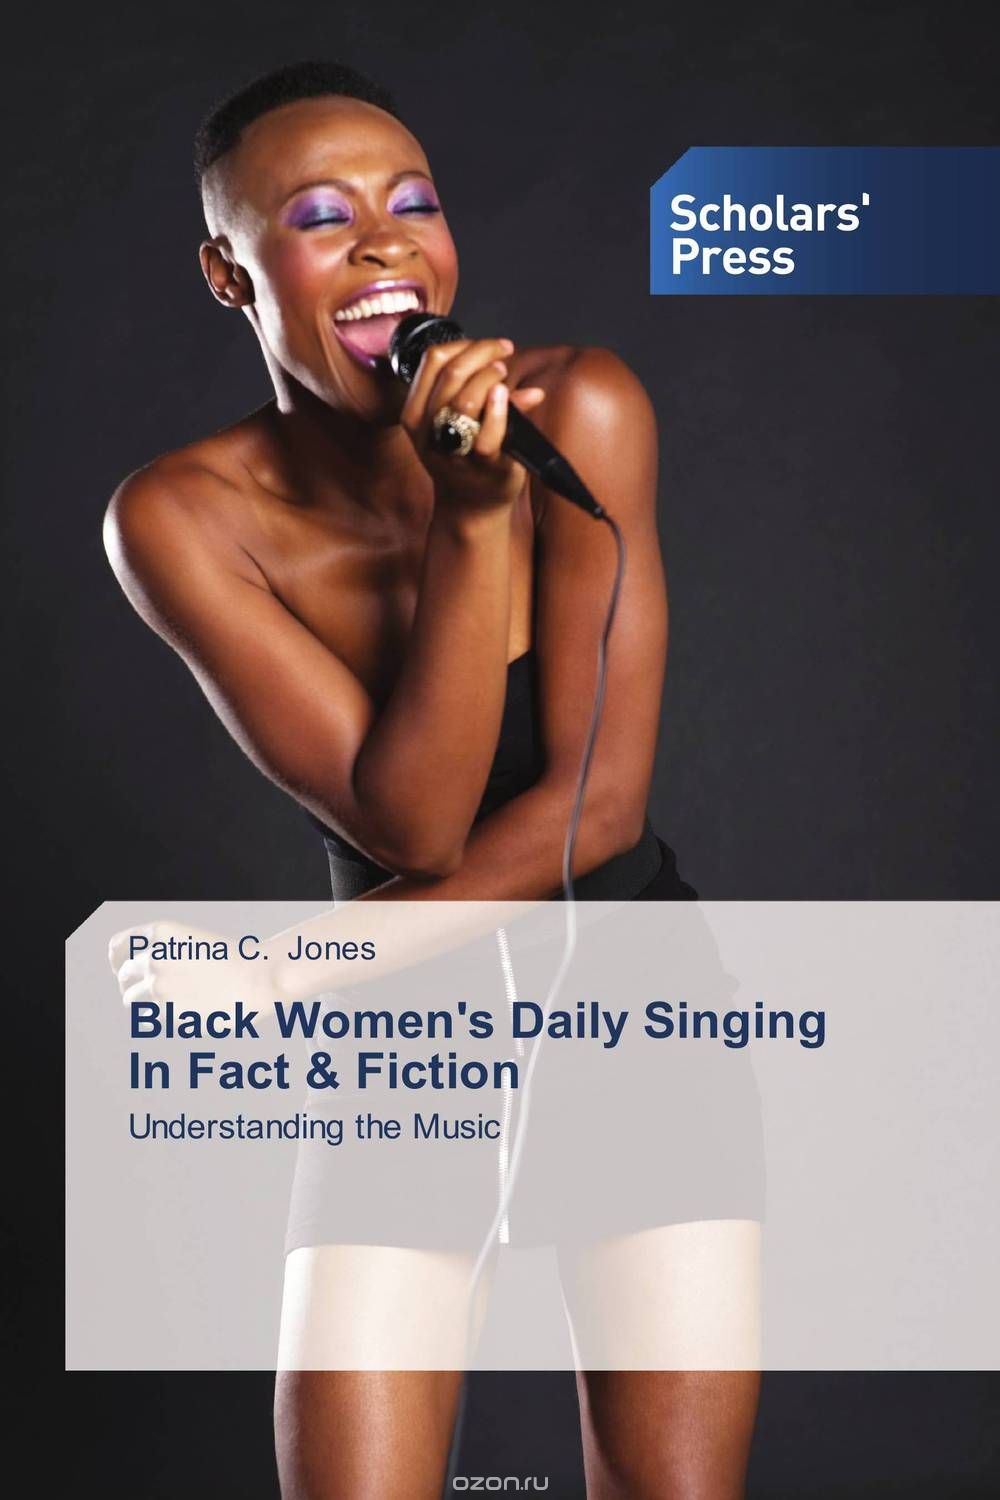 Black Women's Daily Singing In Fact & Fiction